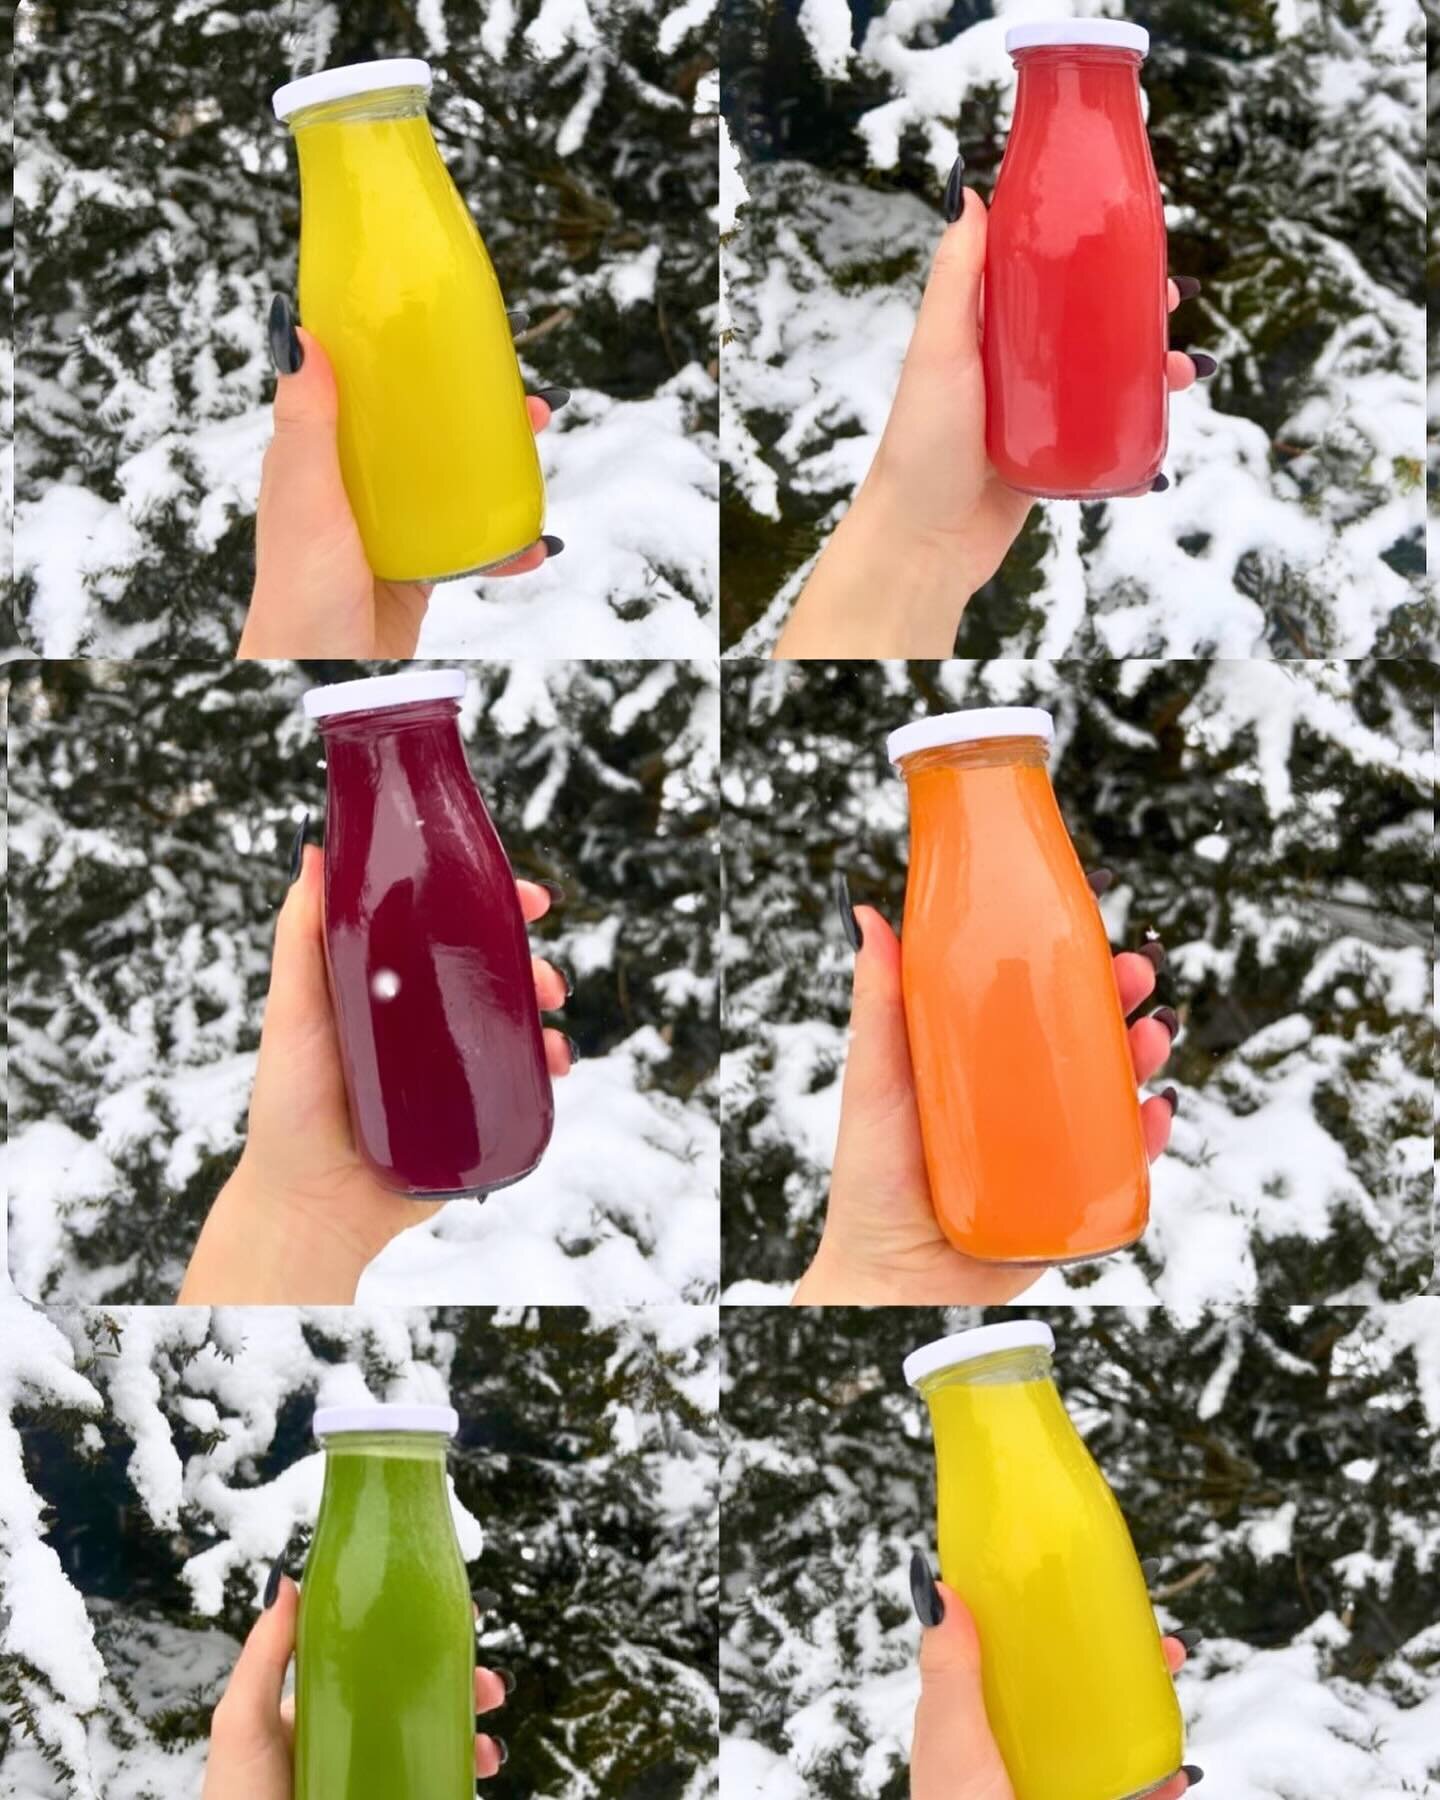 🍉🍍🫚🍋Juice juice juice juice!!!🍉🥥🍊🍍🍋

It&rsquo;s here!!! Order to pick up at your next session at Soft Space or whenever&rsquo;s convenient for you 🥰

We are so ridiculously excited to welcome @heather.rose.b&rsquo;s labor of love, @richandr